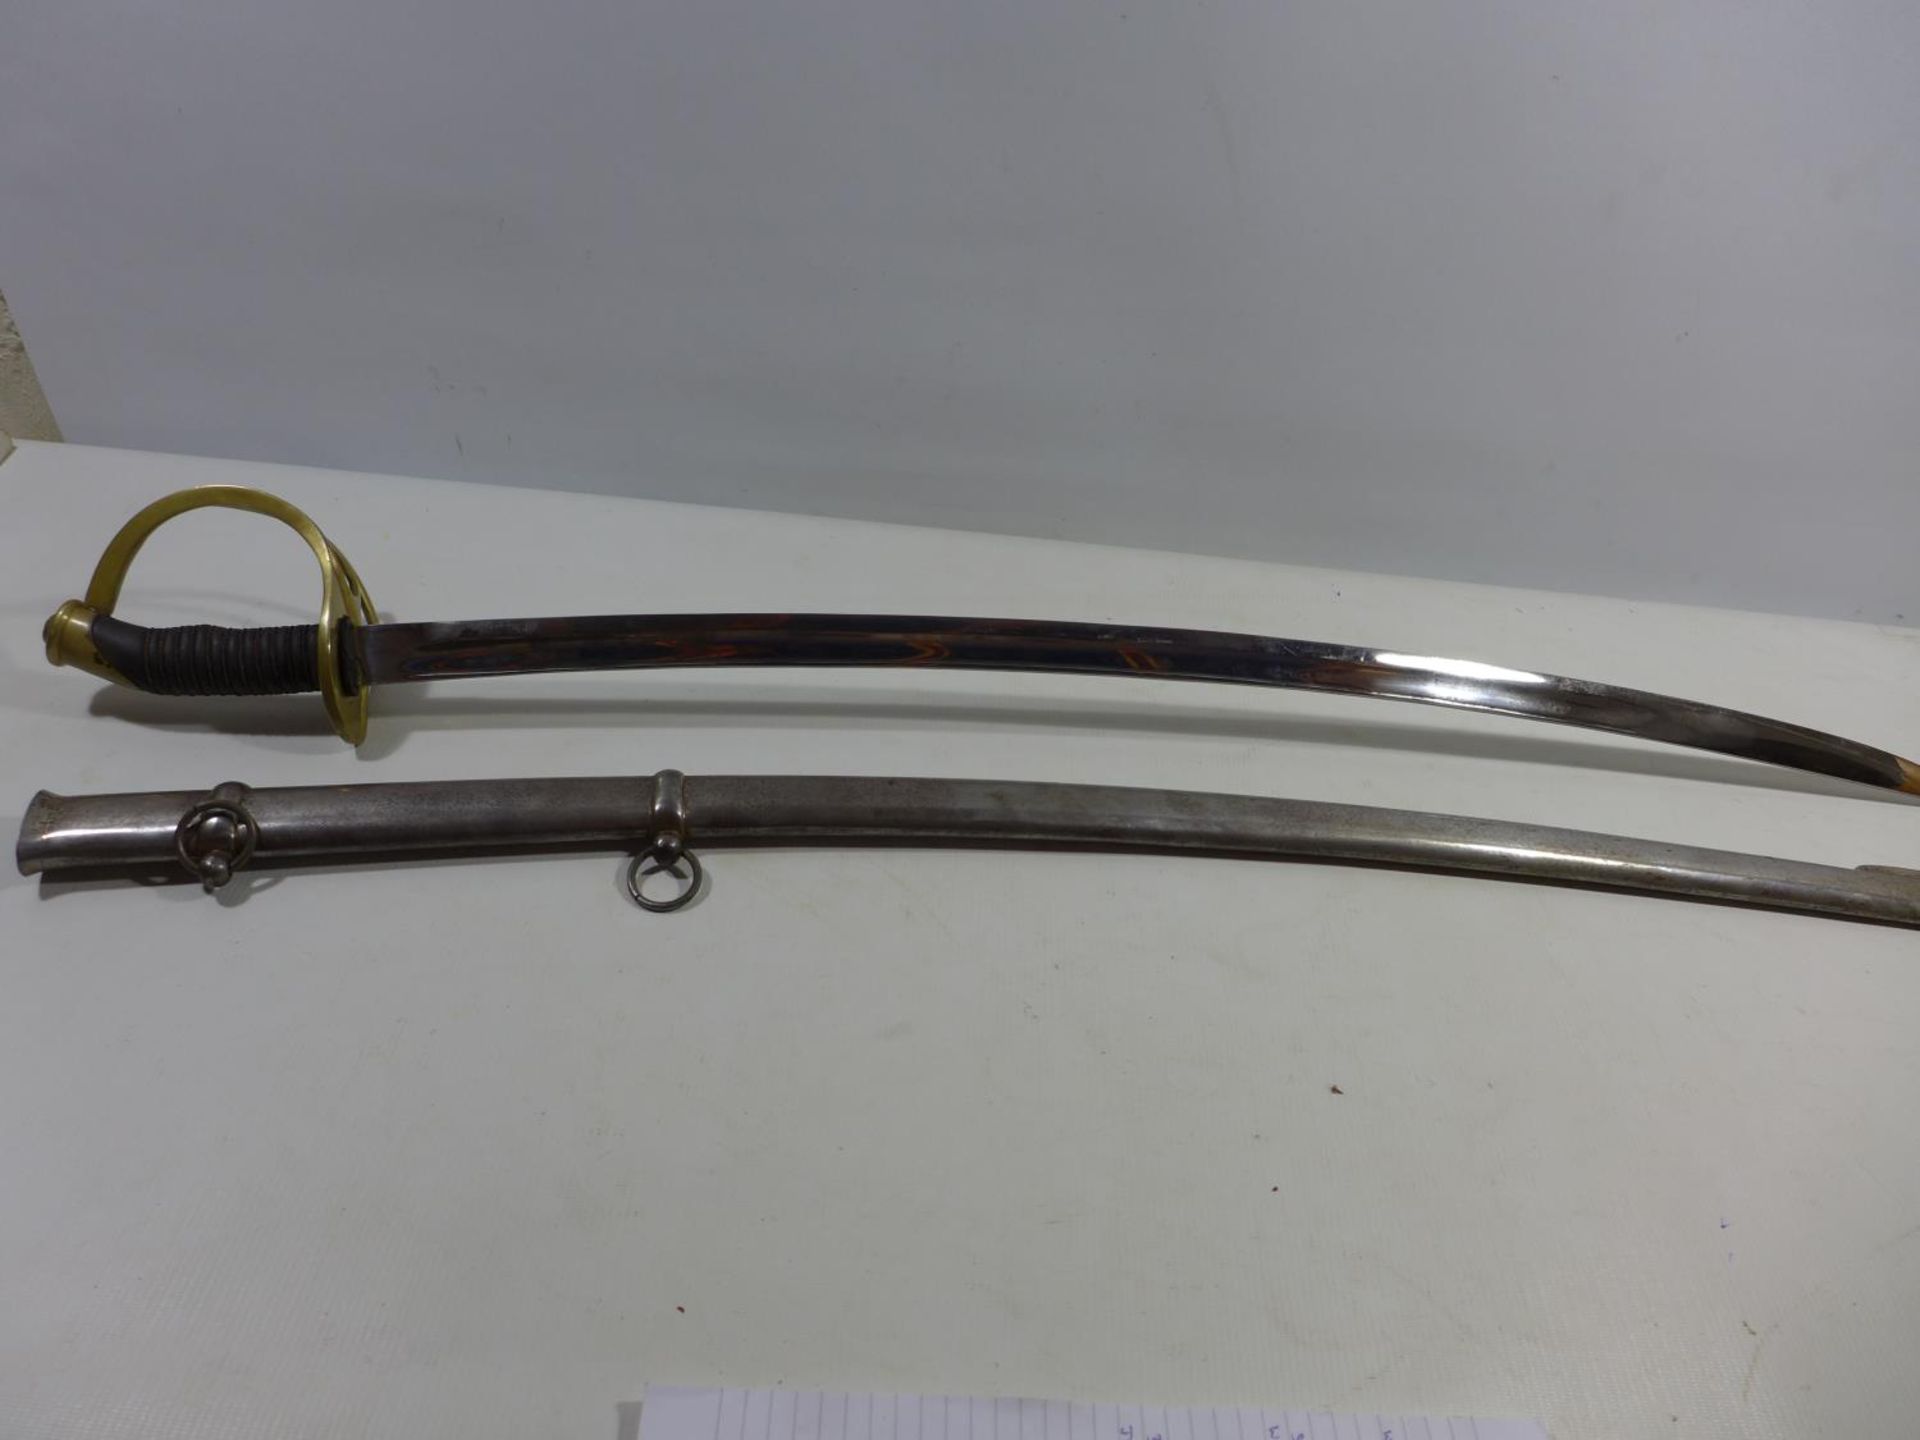 A CAVALRY SWORD AND SCABBARD OF UNKNOWN AGE, 87CM BLADE, PIERCED BRASS GUARD - Image 3 of 6